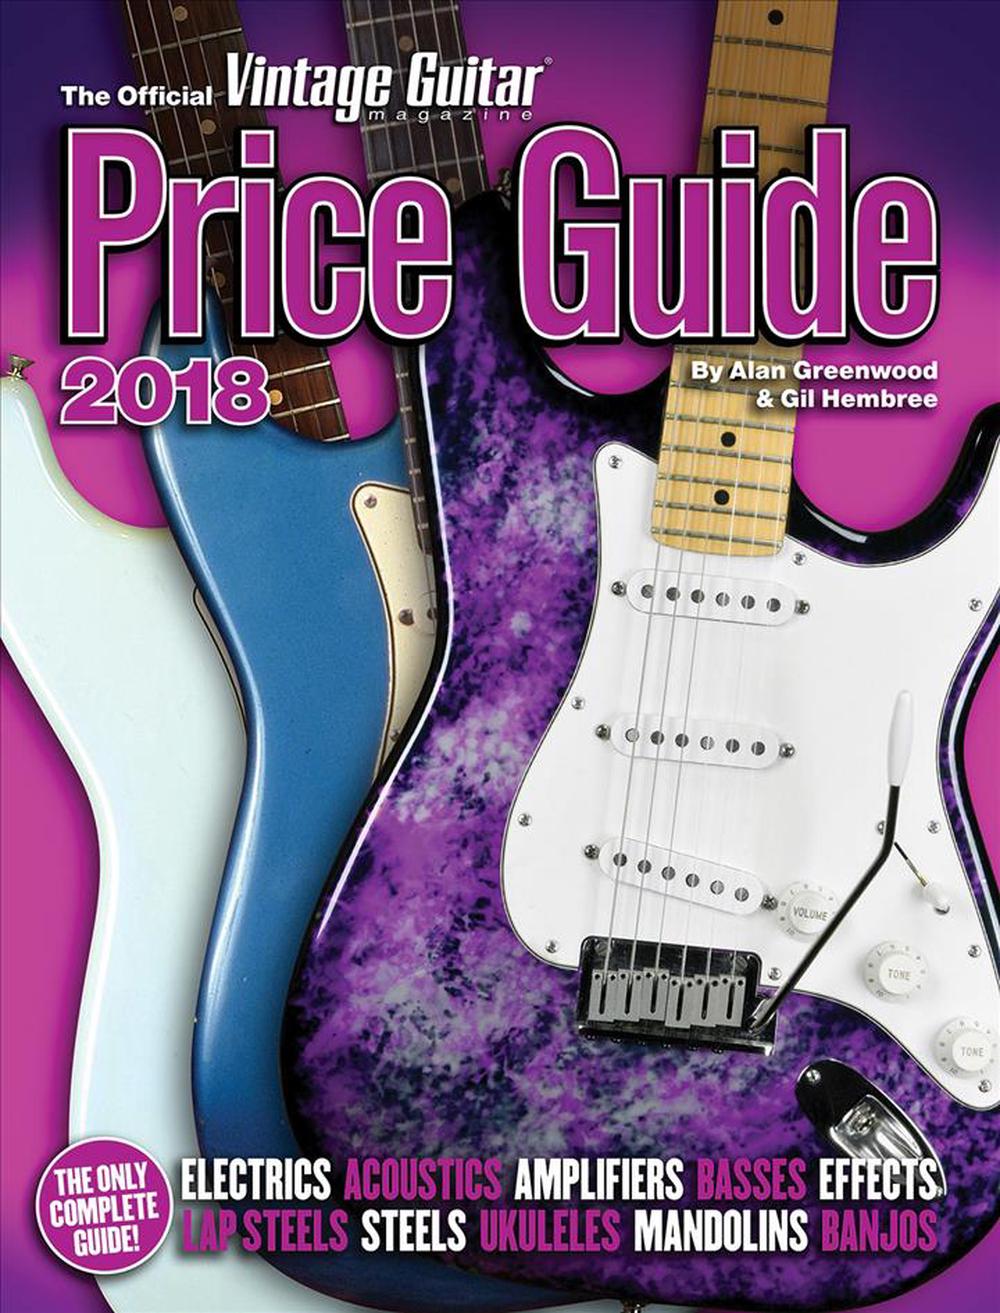 Official Vintage Guitar Magazine Price Guide - 2018 by Alan Greenwood